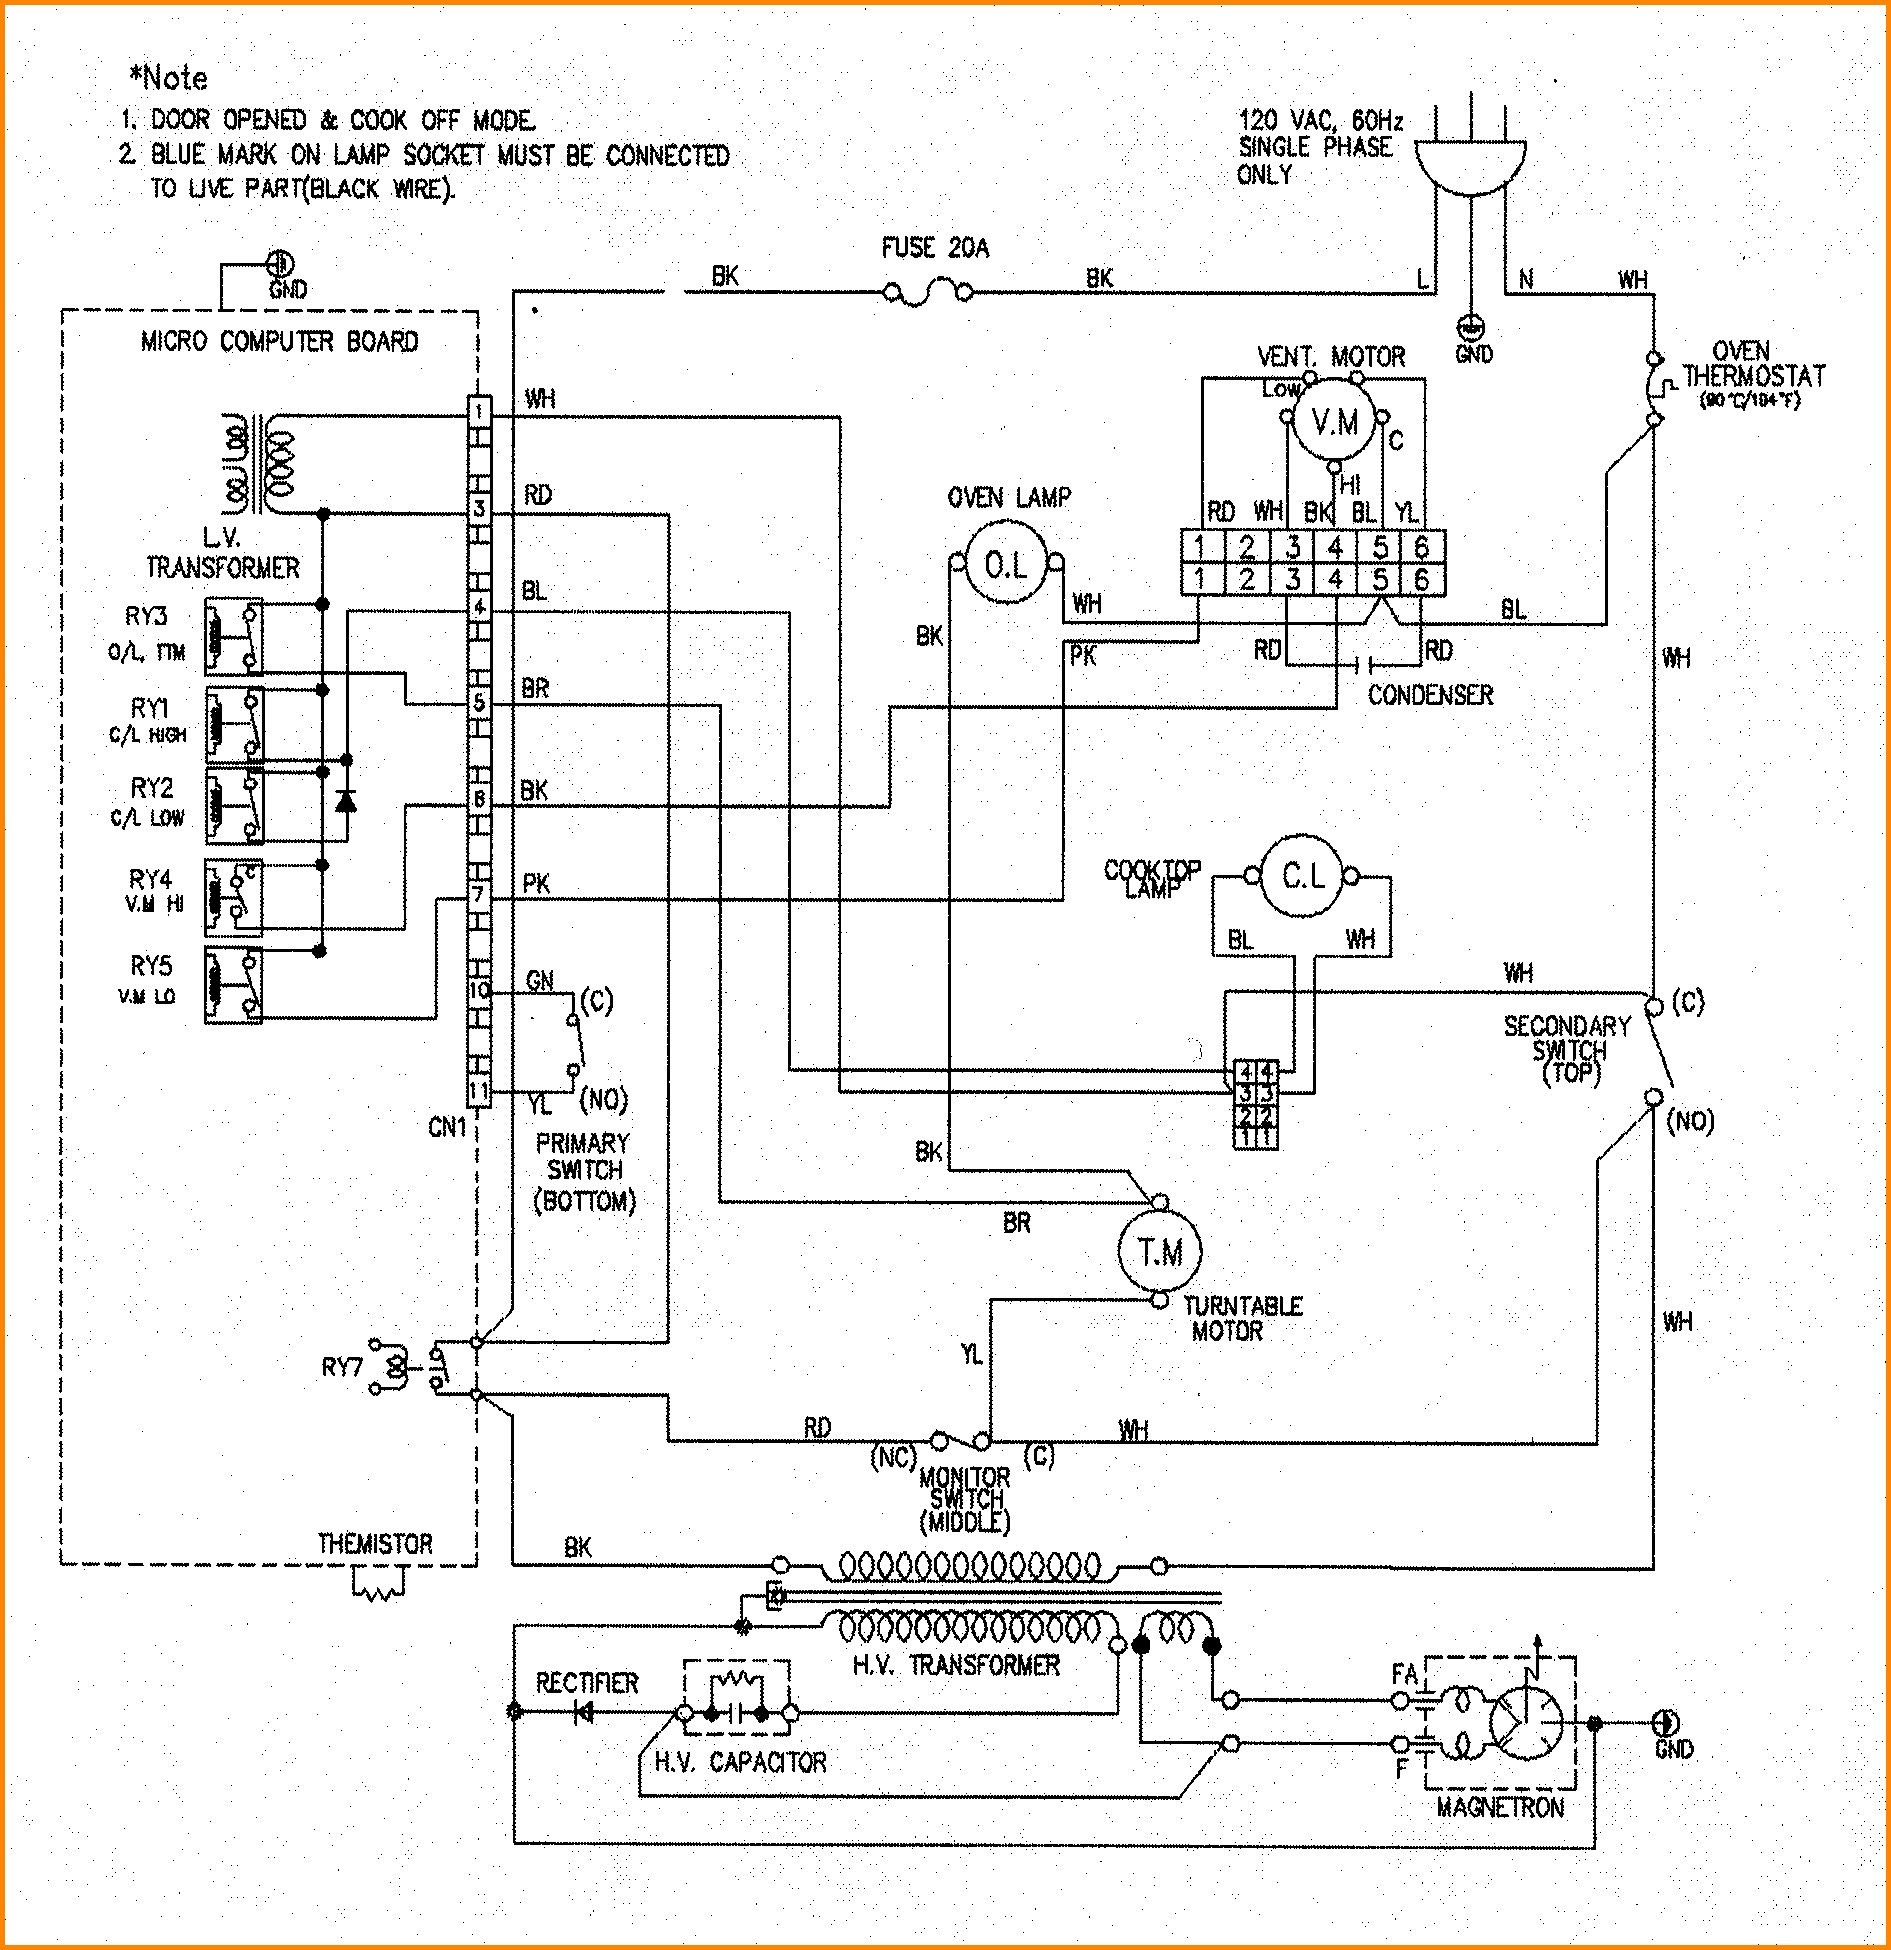 electric oven thermostat wiring diagram Collection wiring diagram for oven thermostat free wiring diagram rh DOWNLOAD Wiring Diagram